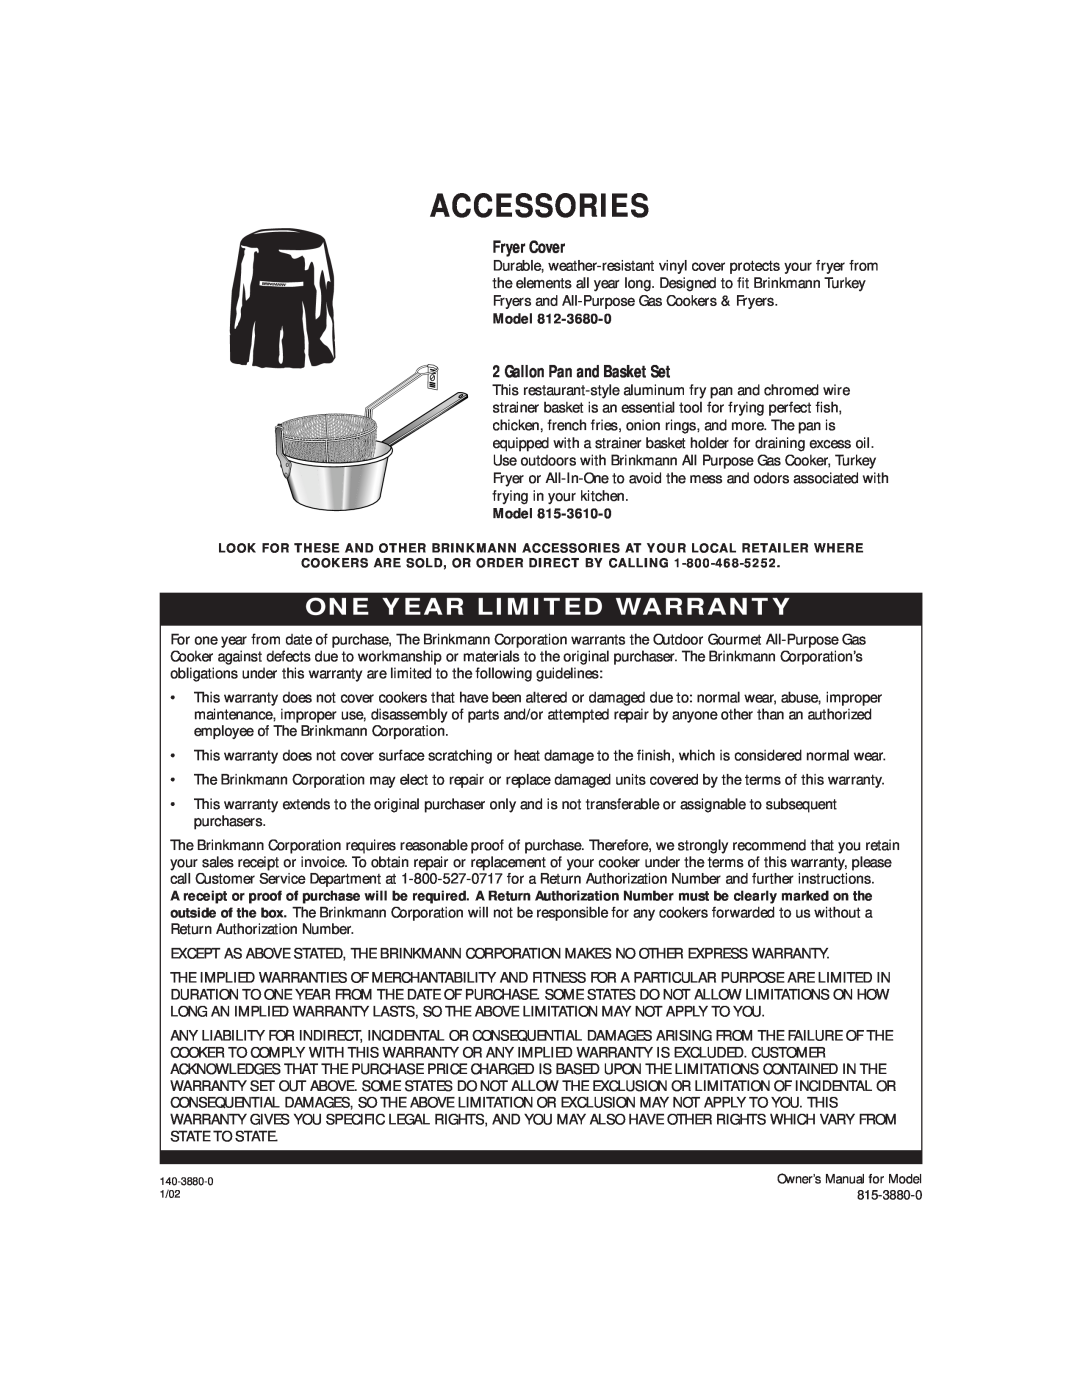 Brinkmann 815-3880-0 owner manual Accessories, Model, One Year Limited Warranty, Fryer Cover, Gallon Pan and Basket Set 